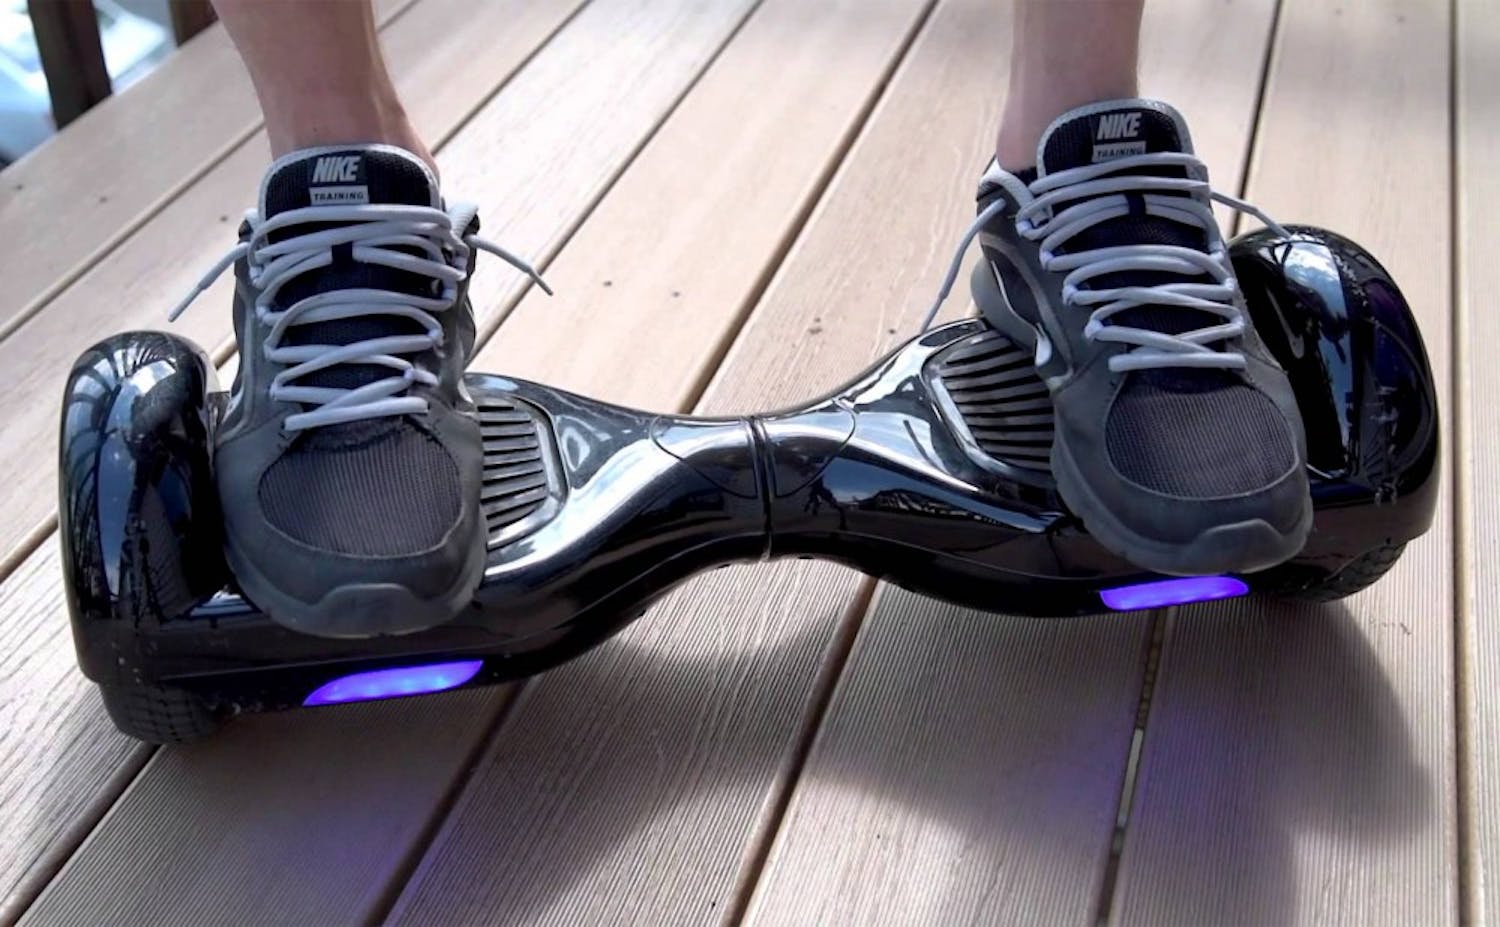 Hoverboards have been reported to spontaneously ignite, leading approximately 20 colleges around the country to ban the self-balancing scooters.